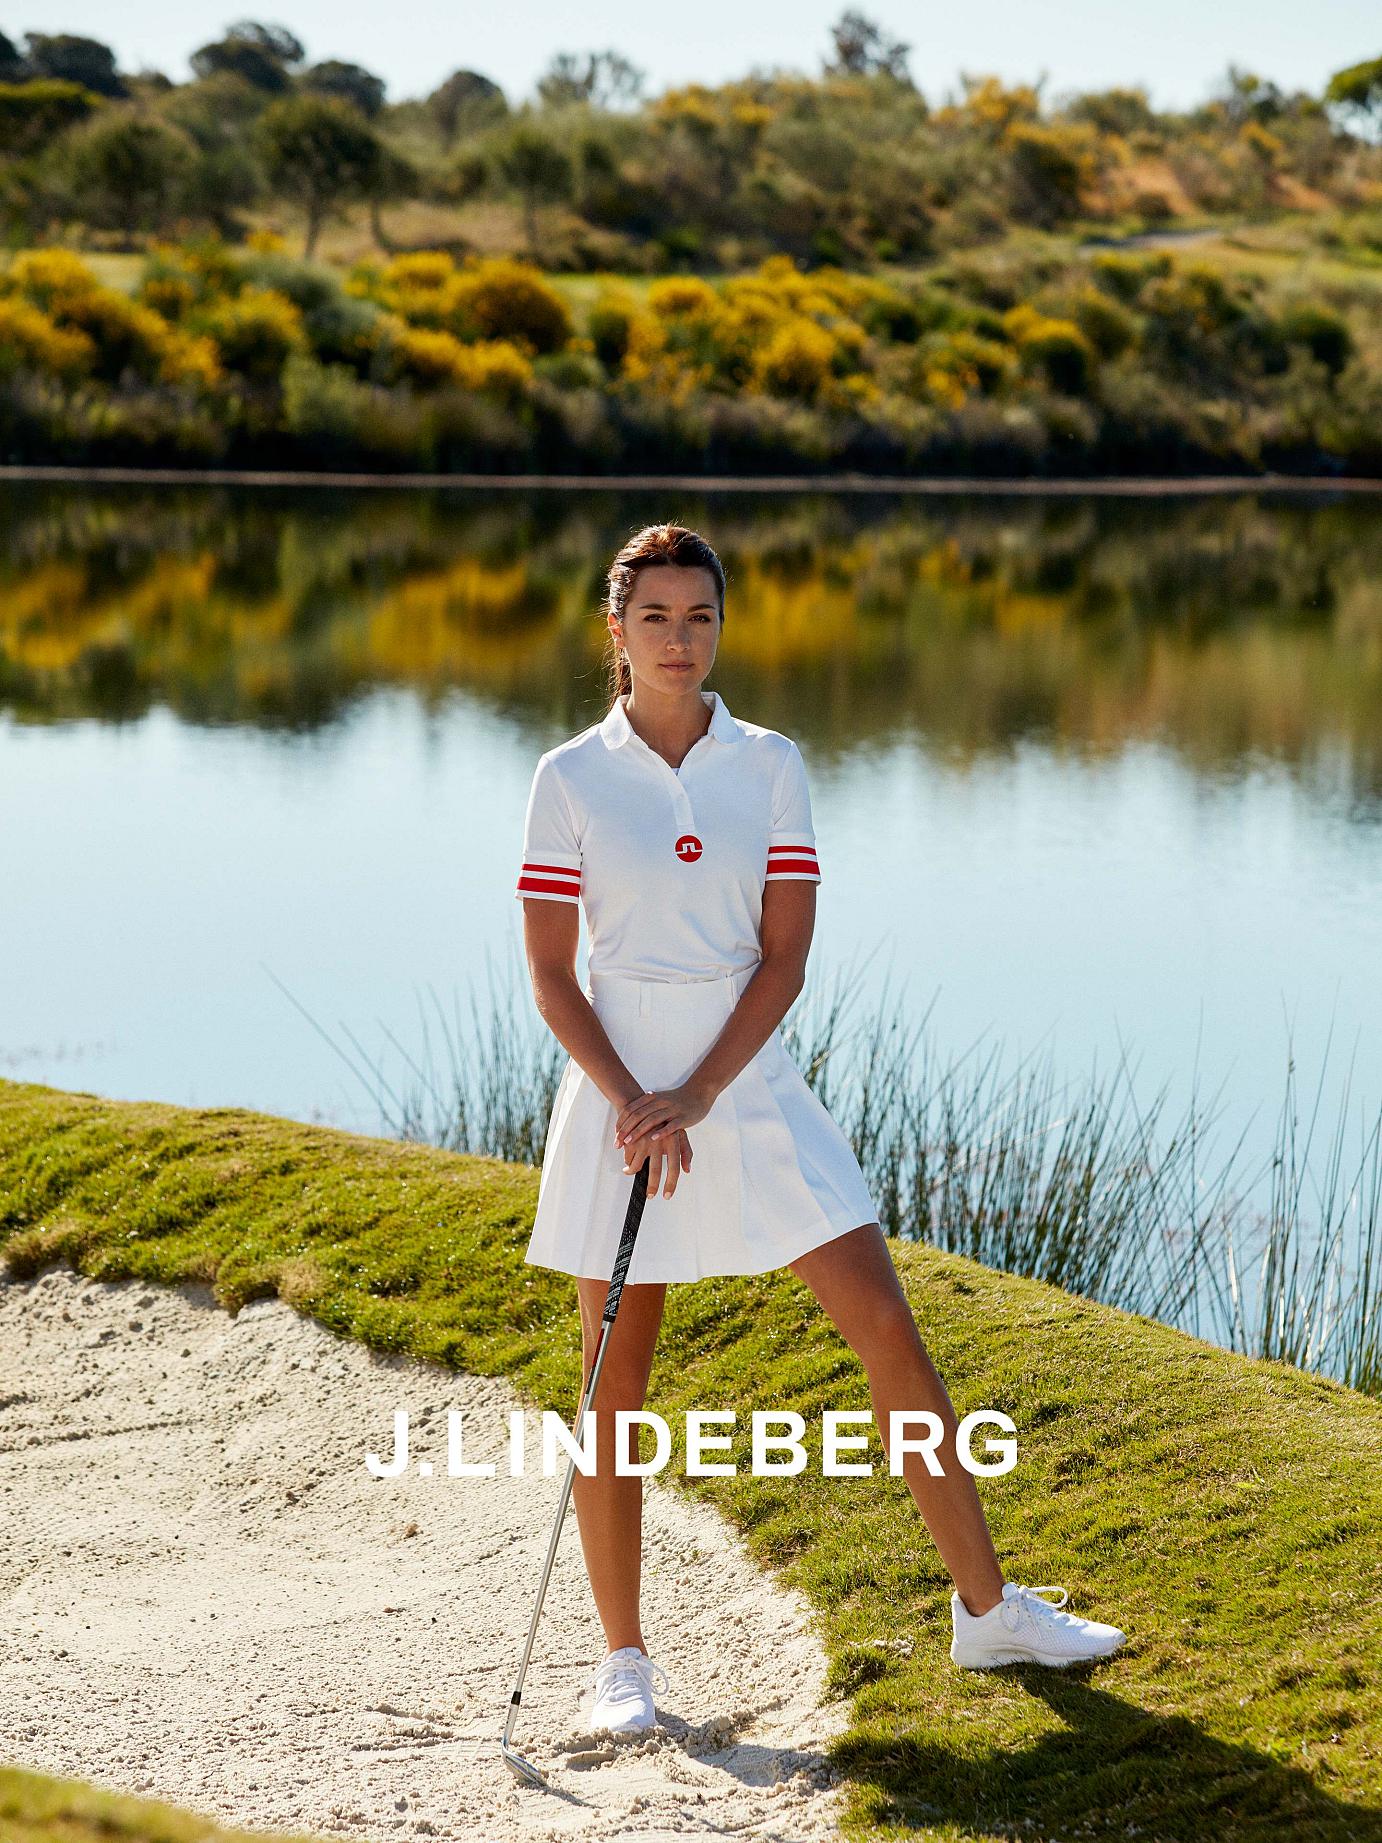 CoqCreative power by ProductionLink s.r.l. J-Lindeberg-Golf-Club J-Lindeberg-Golf-Club  J-Lindeberg-Golf-Club